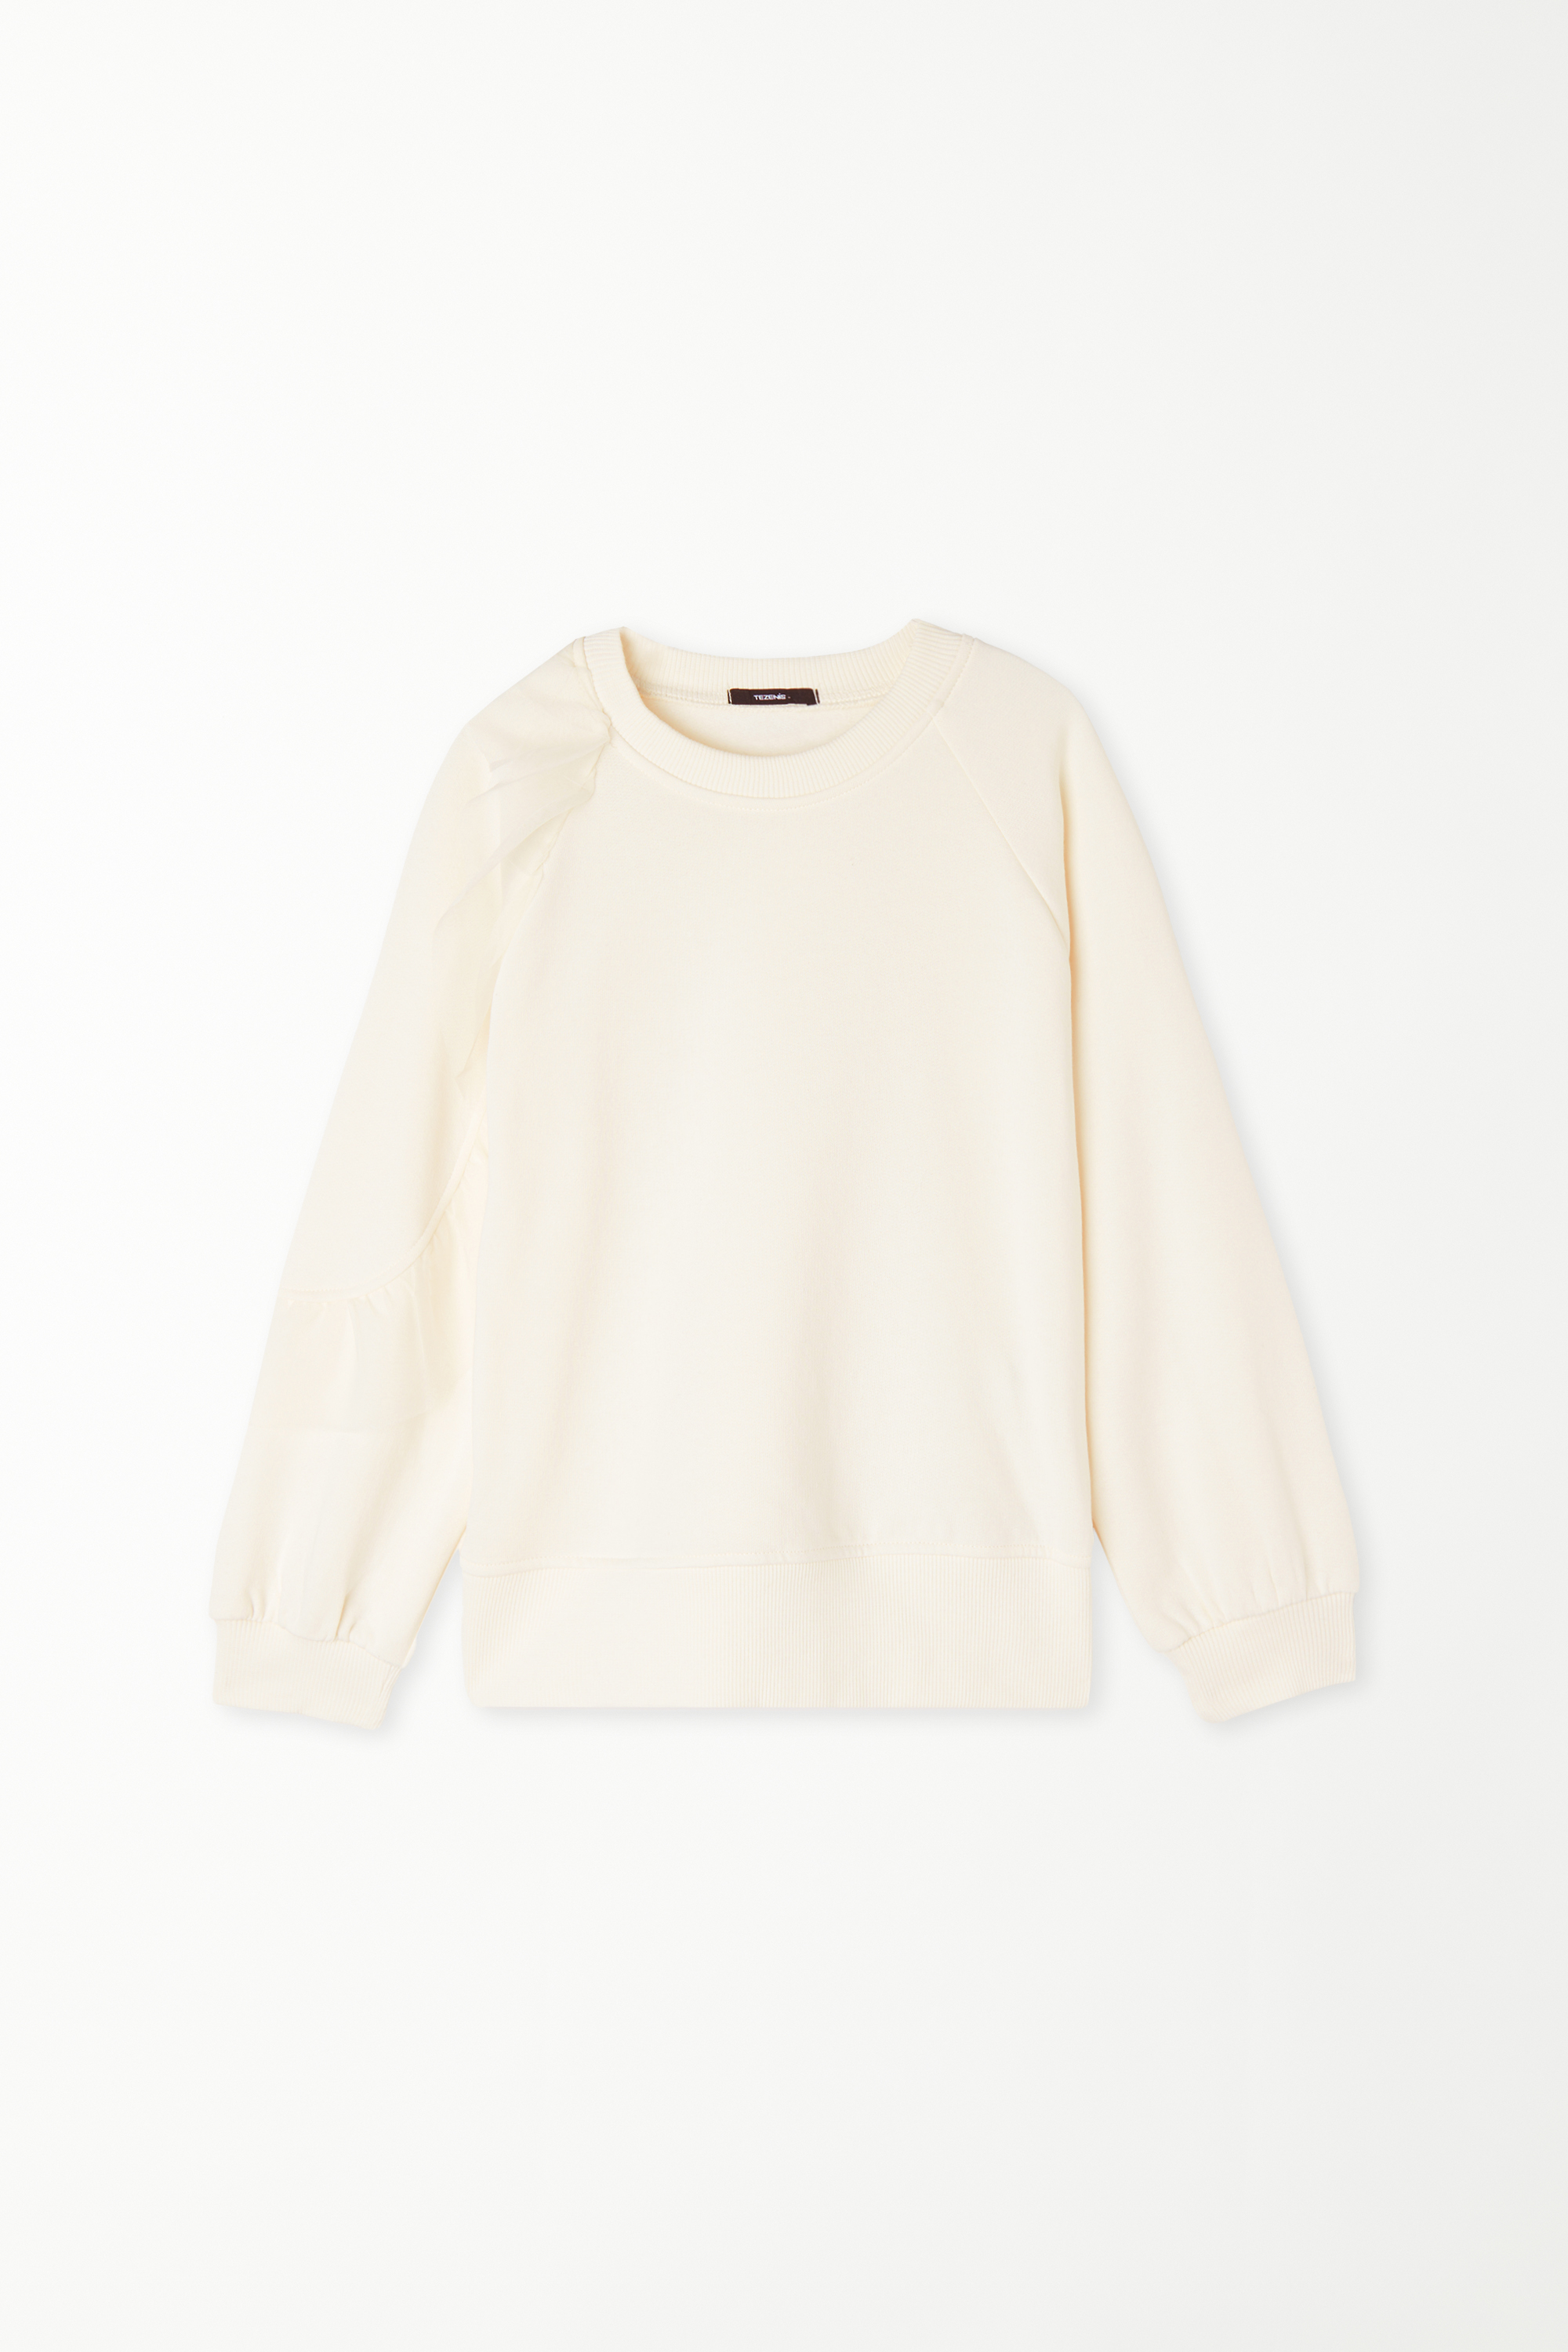 Girls’ Long-Sleeved Sweatshirt with Tulle Frill